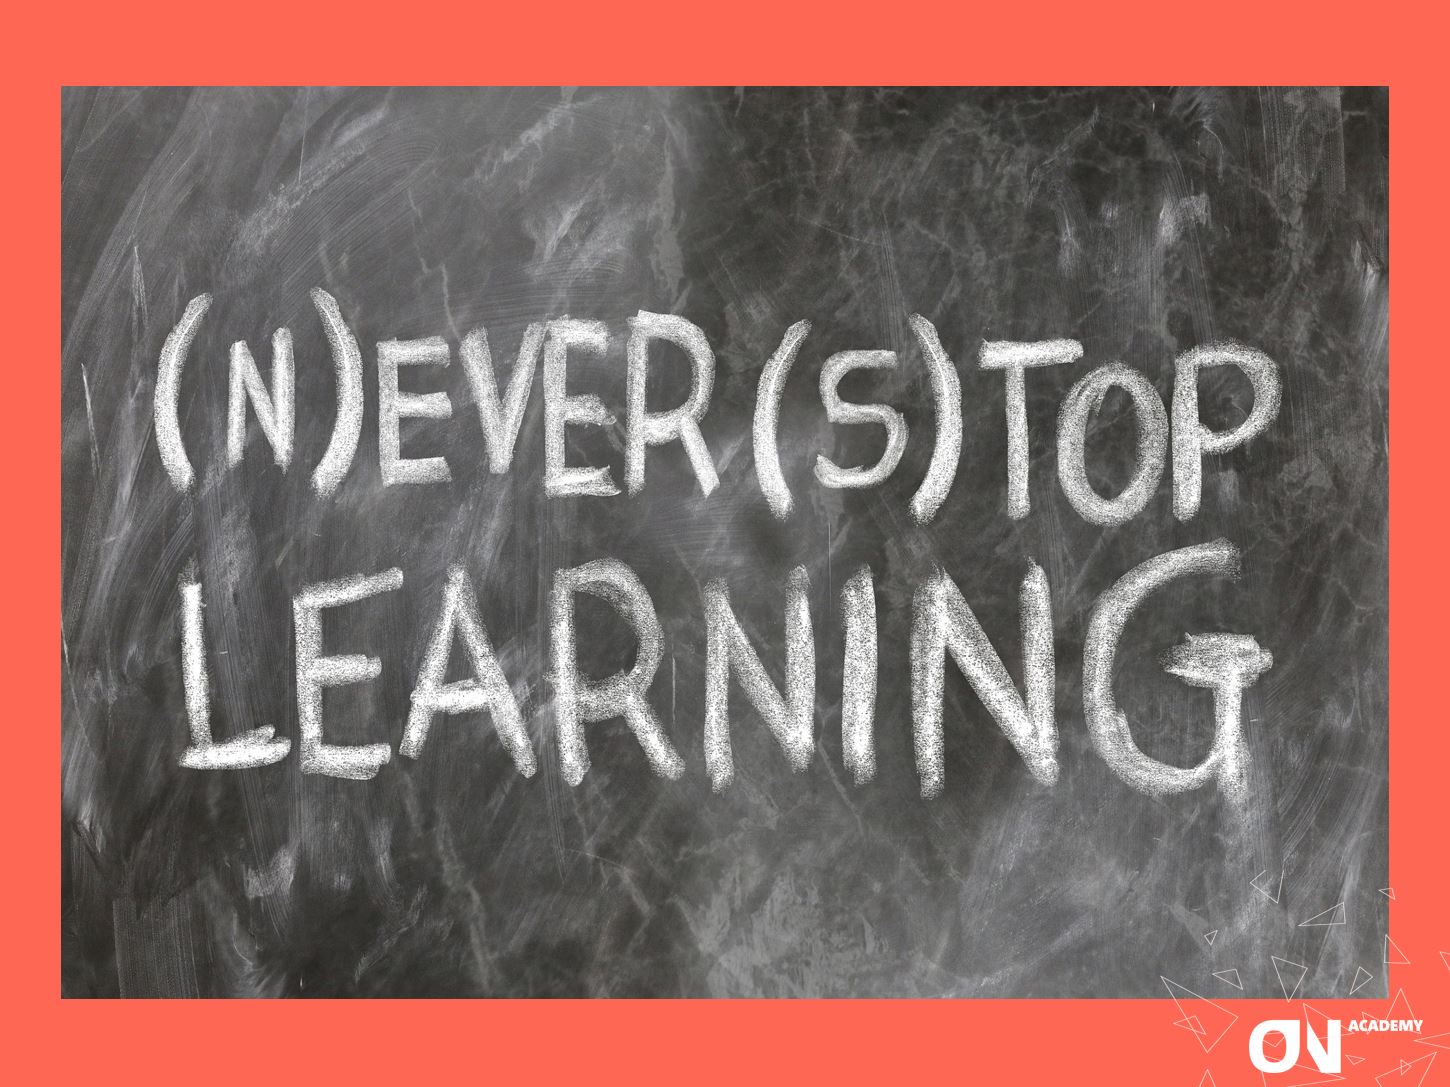 (N)ever (s)top learning!